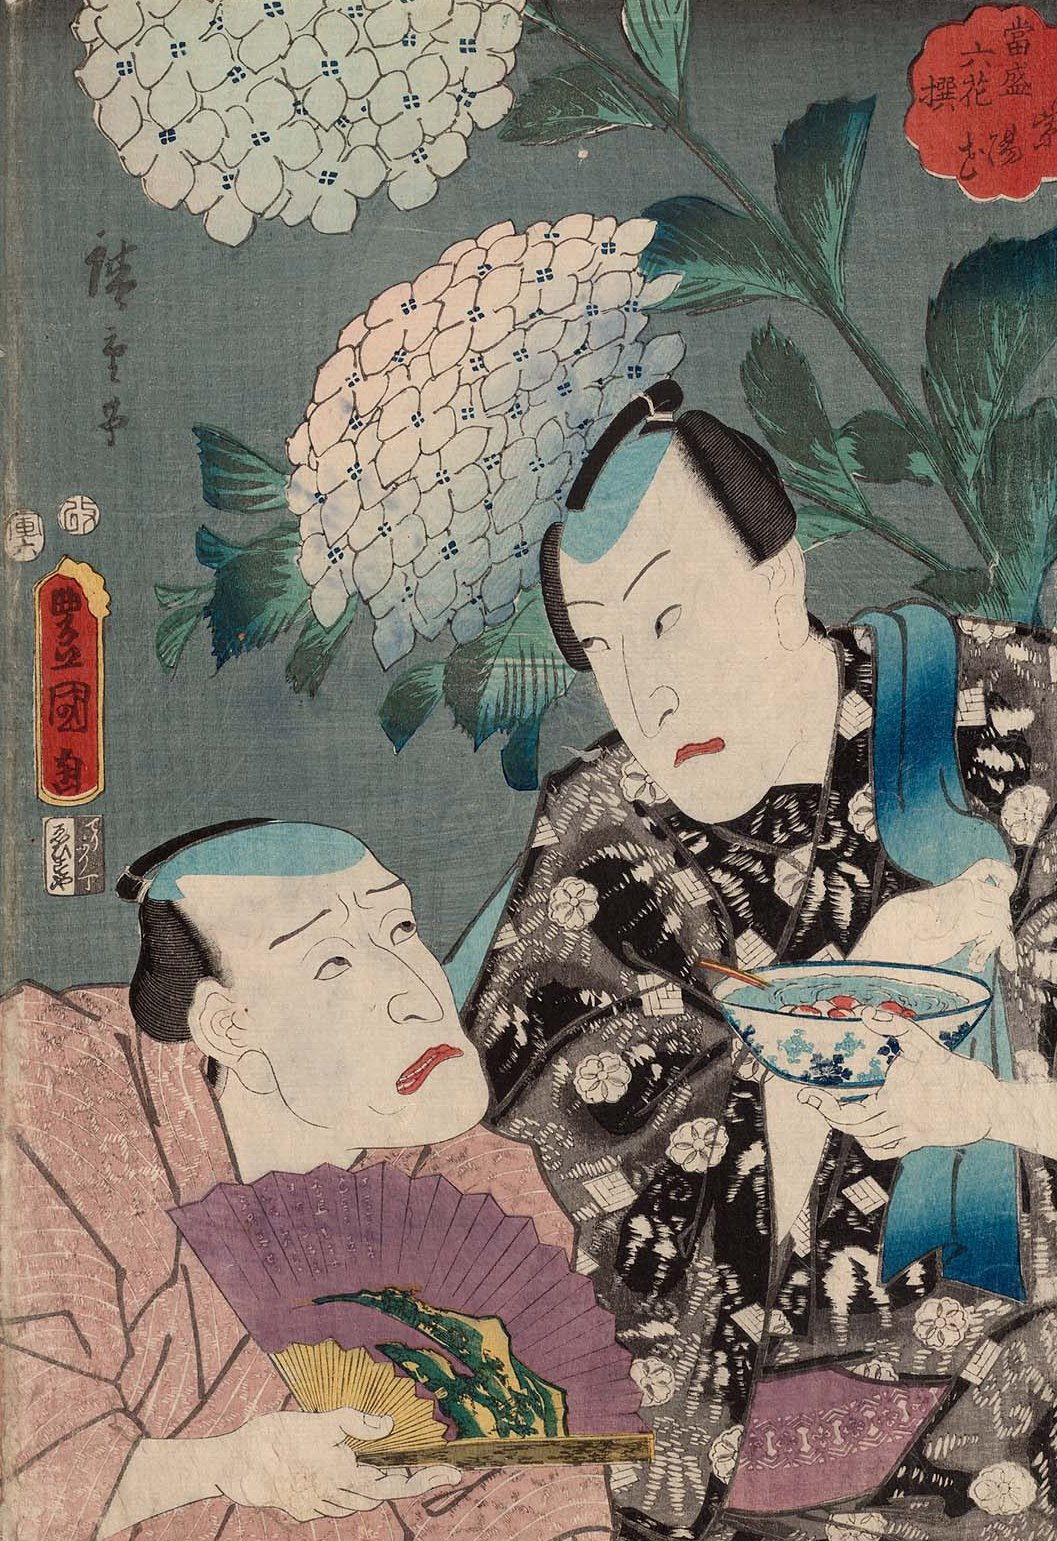 Utagawa Kunisada. Hydrangea: the Actors Bando, Takesawa I and Nakamura, I. Caruso a Series of "featured plants and contemporaries, blooming in full force"